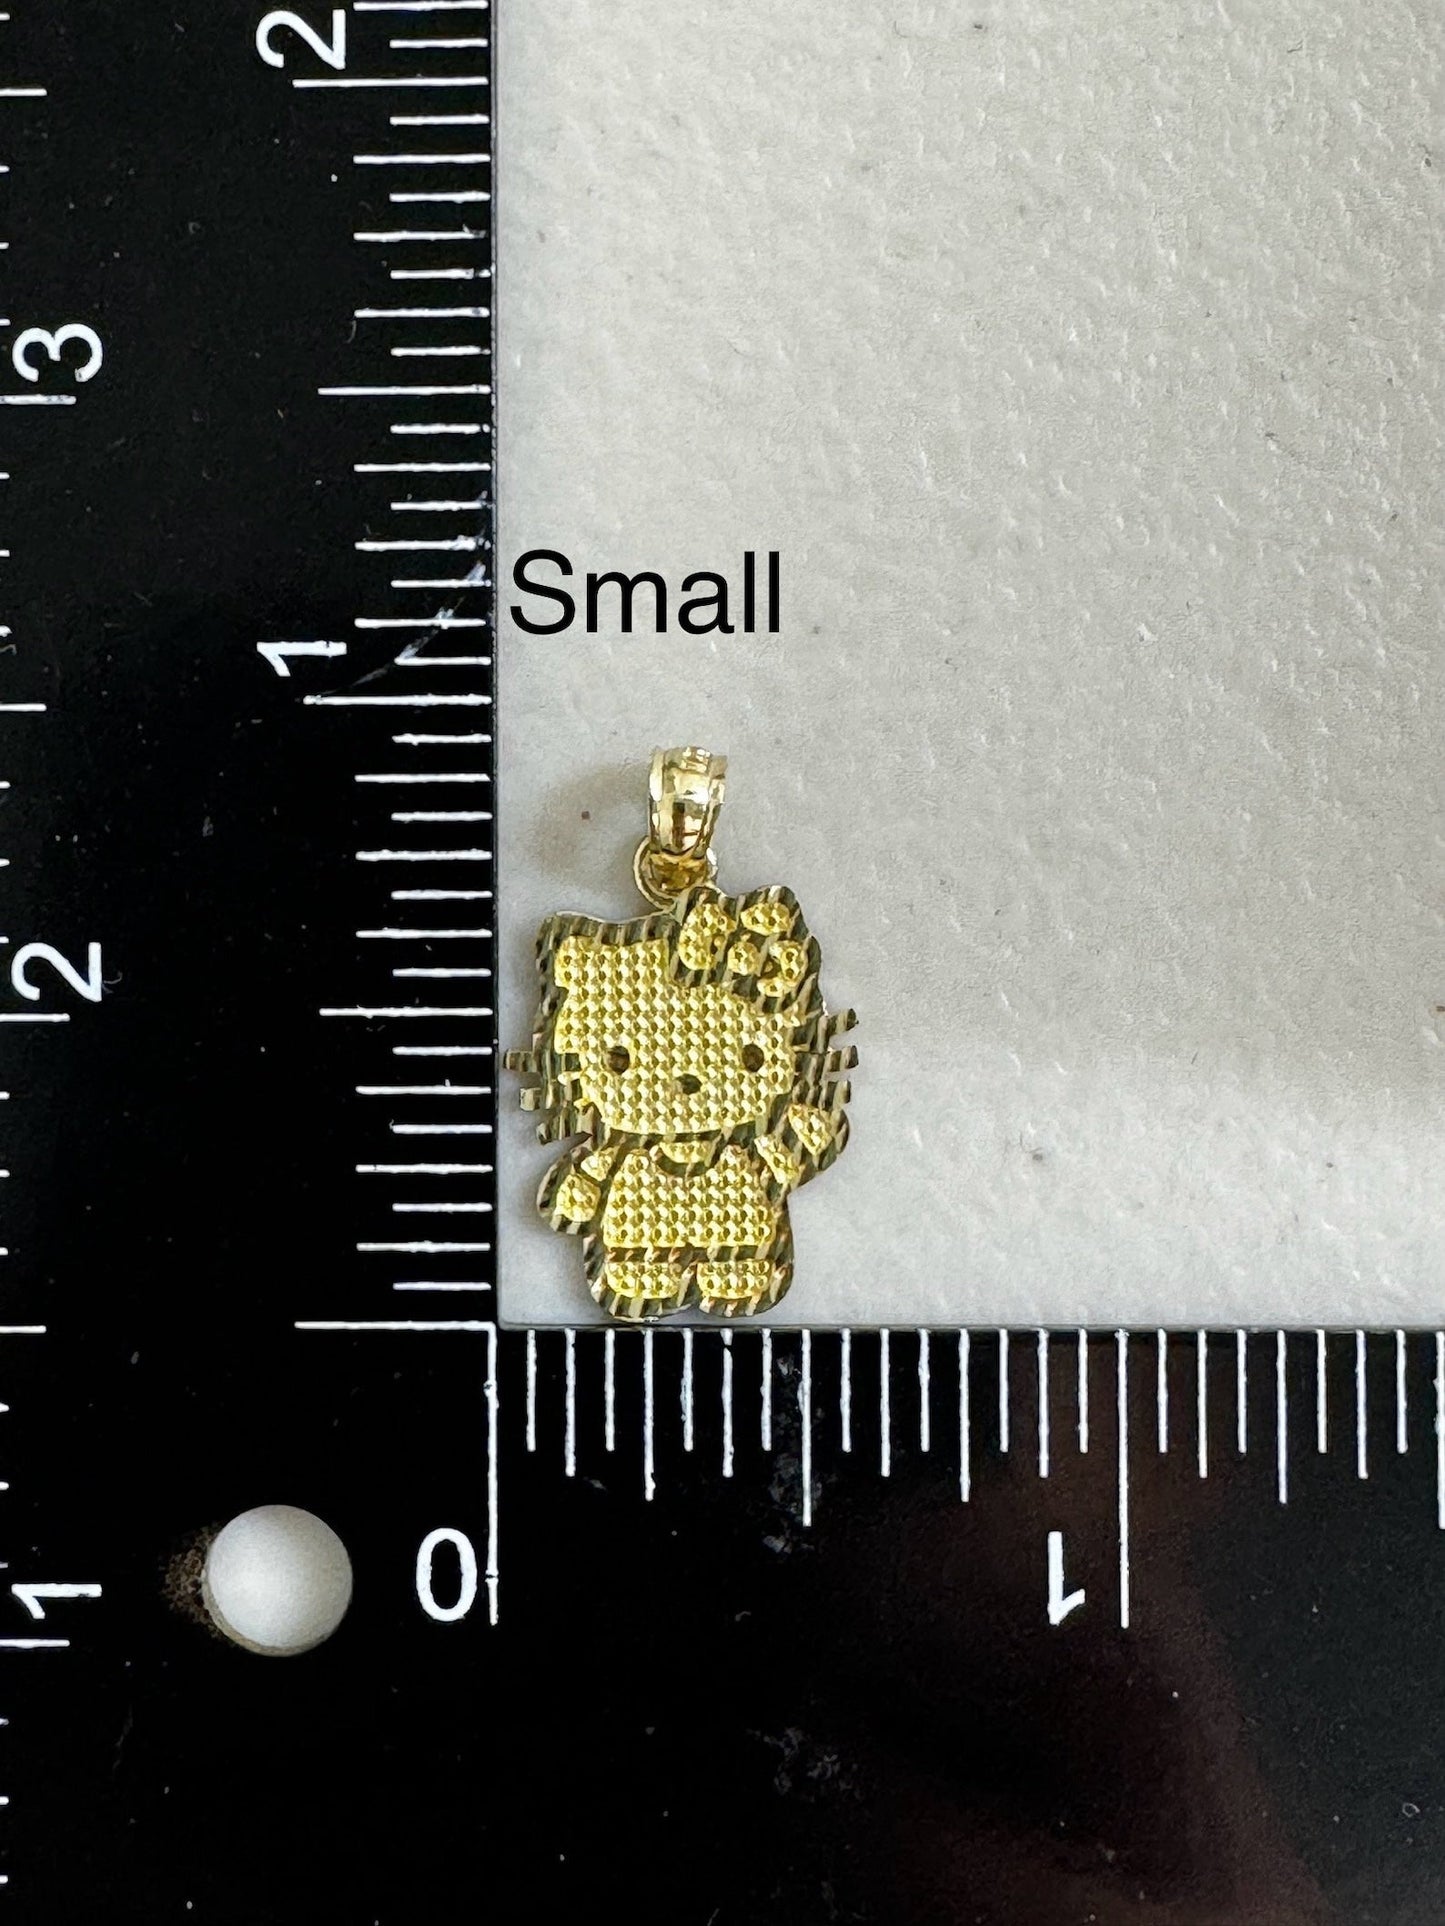 14K Solid Gold Kitty Pendant C